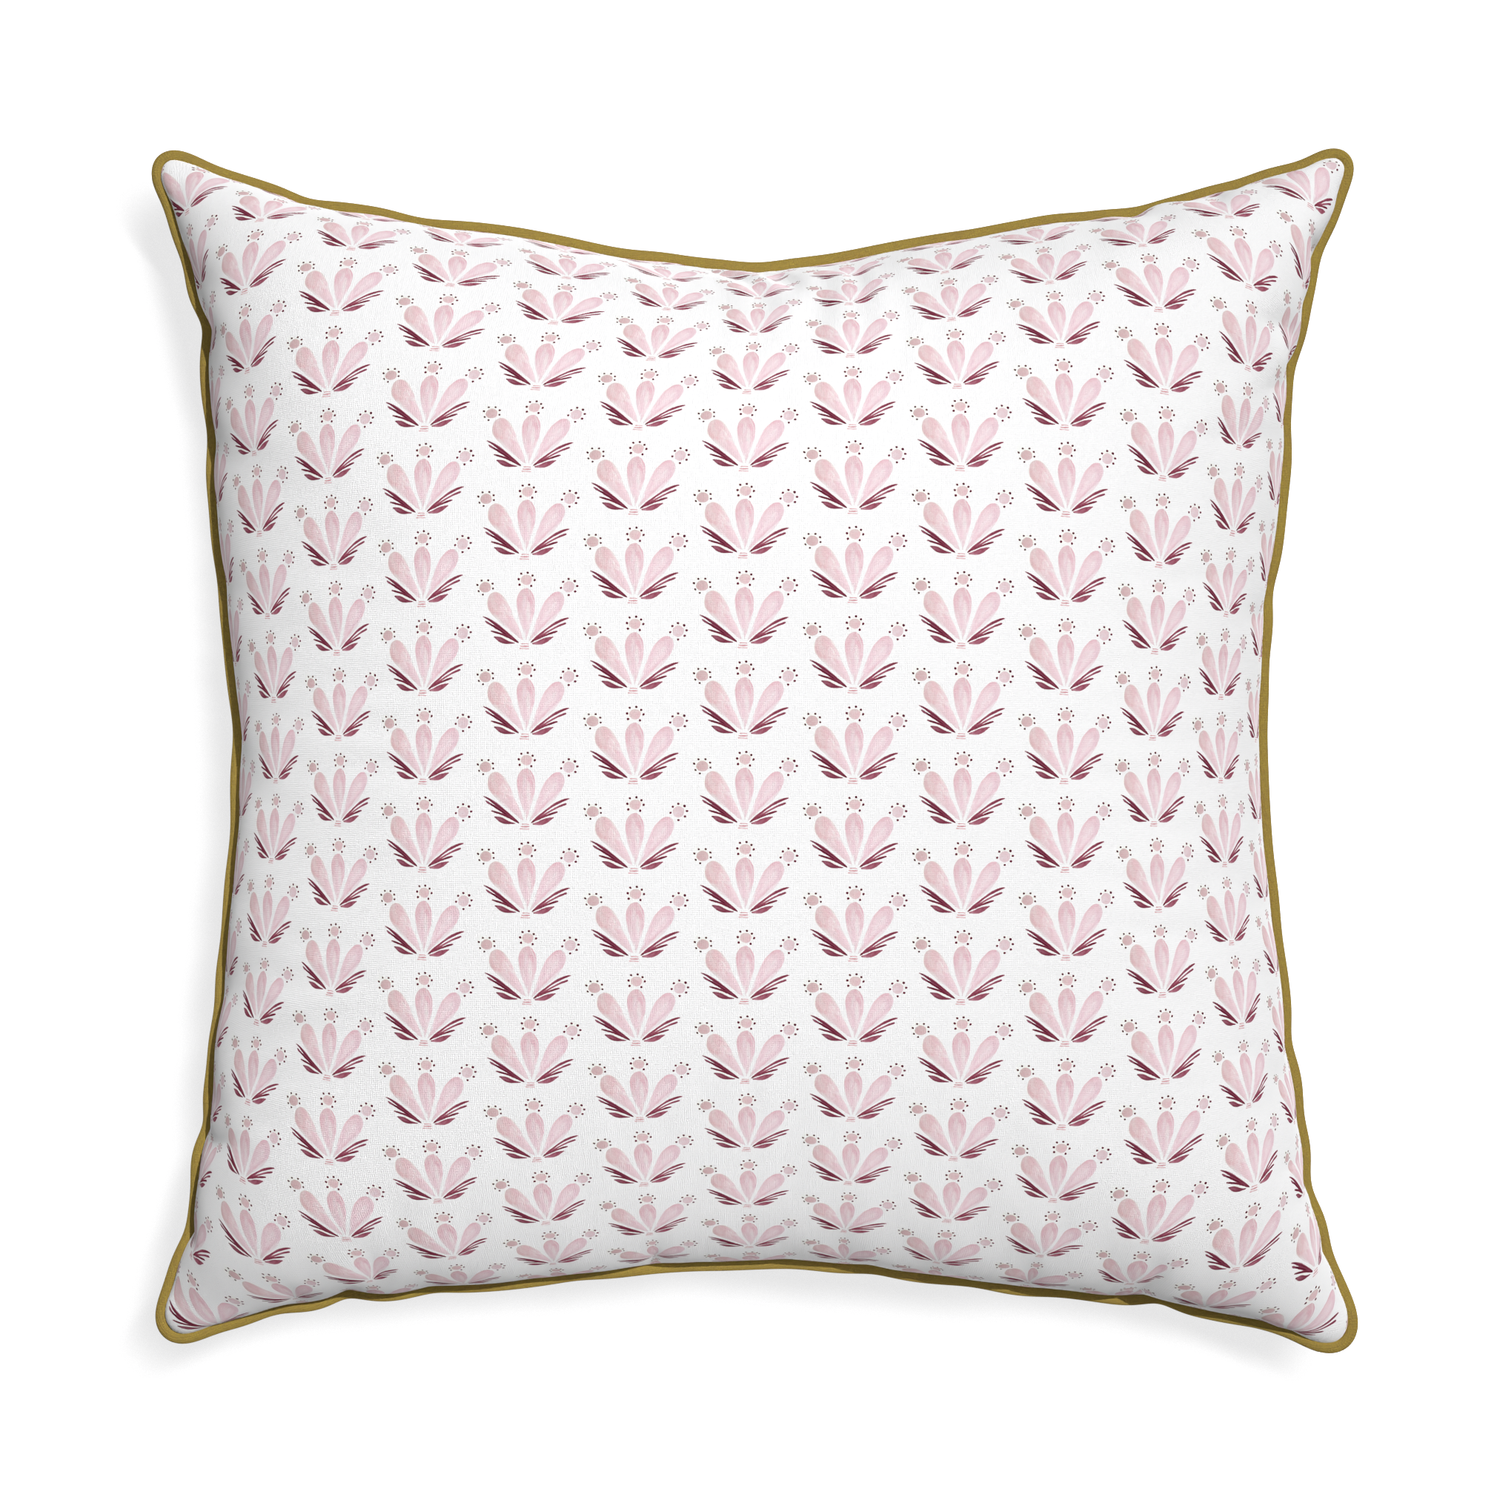 Euro-sham serena pink custom pink & burgundy drop repeat floralpillow with c piping on white background